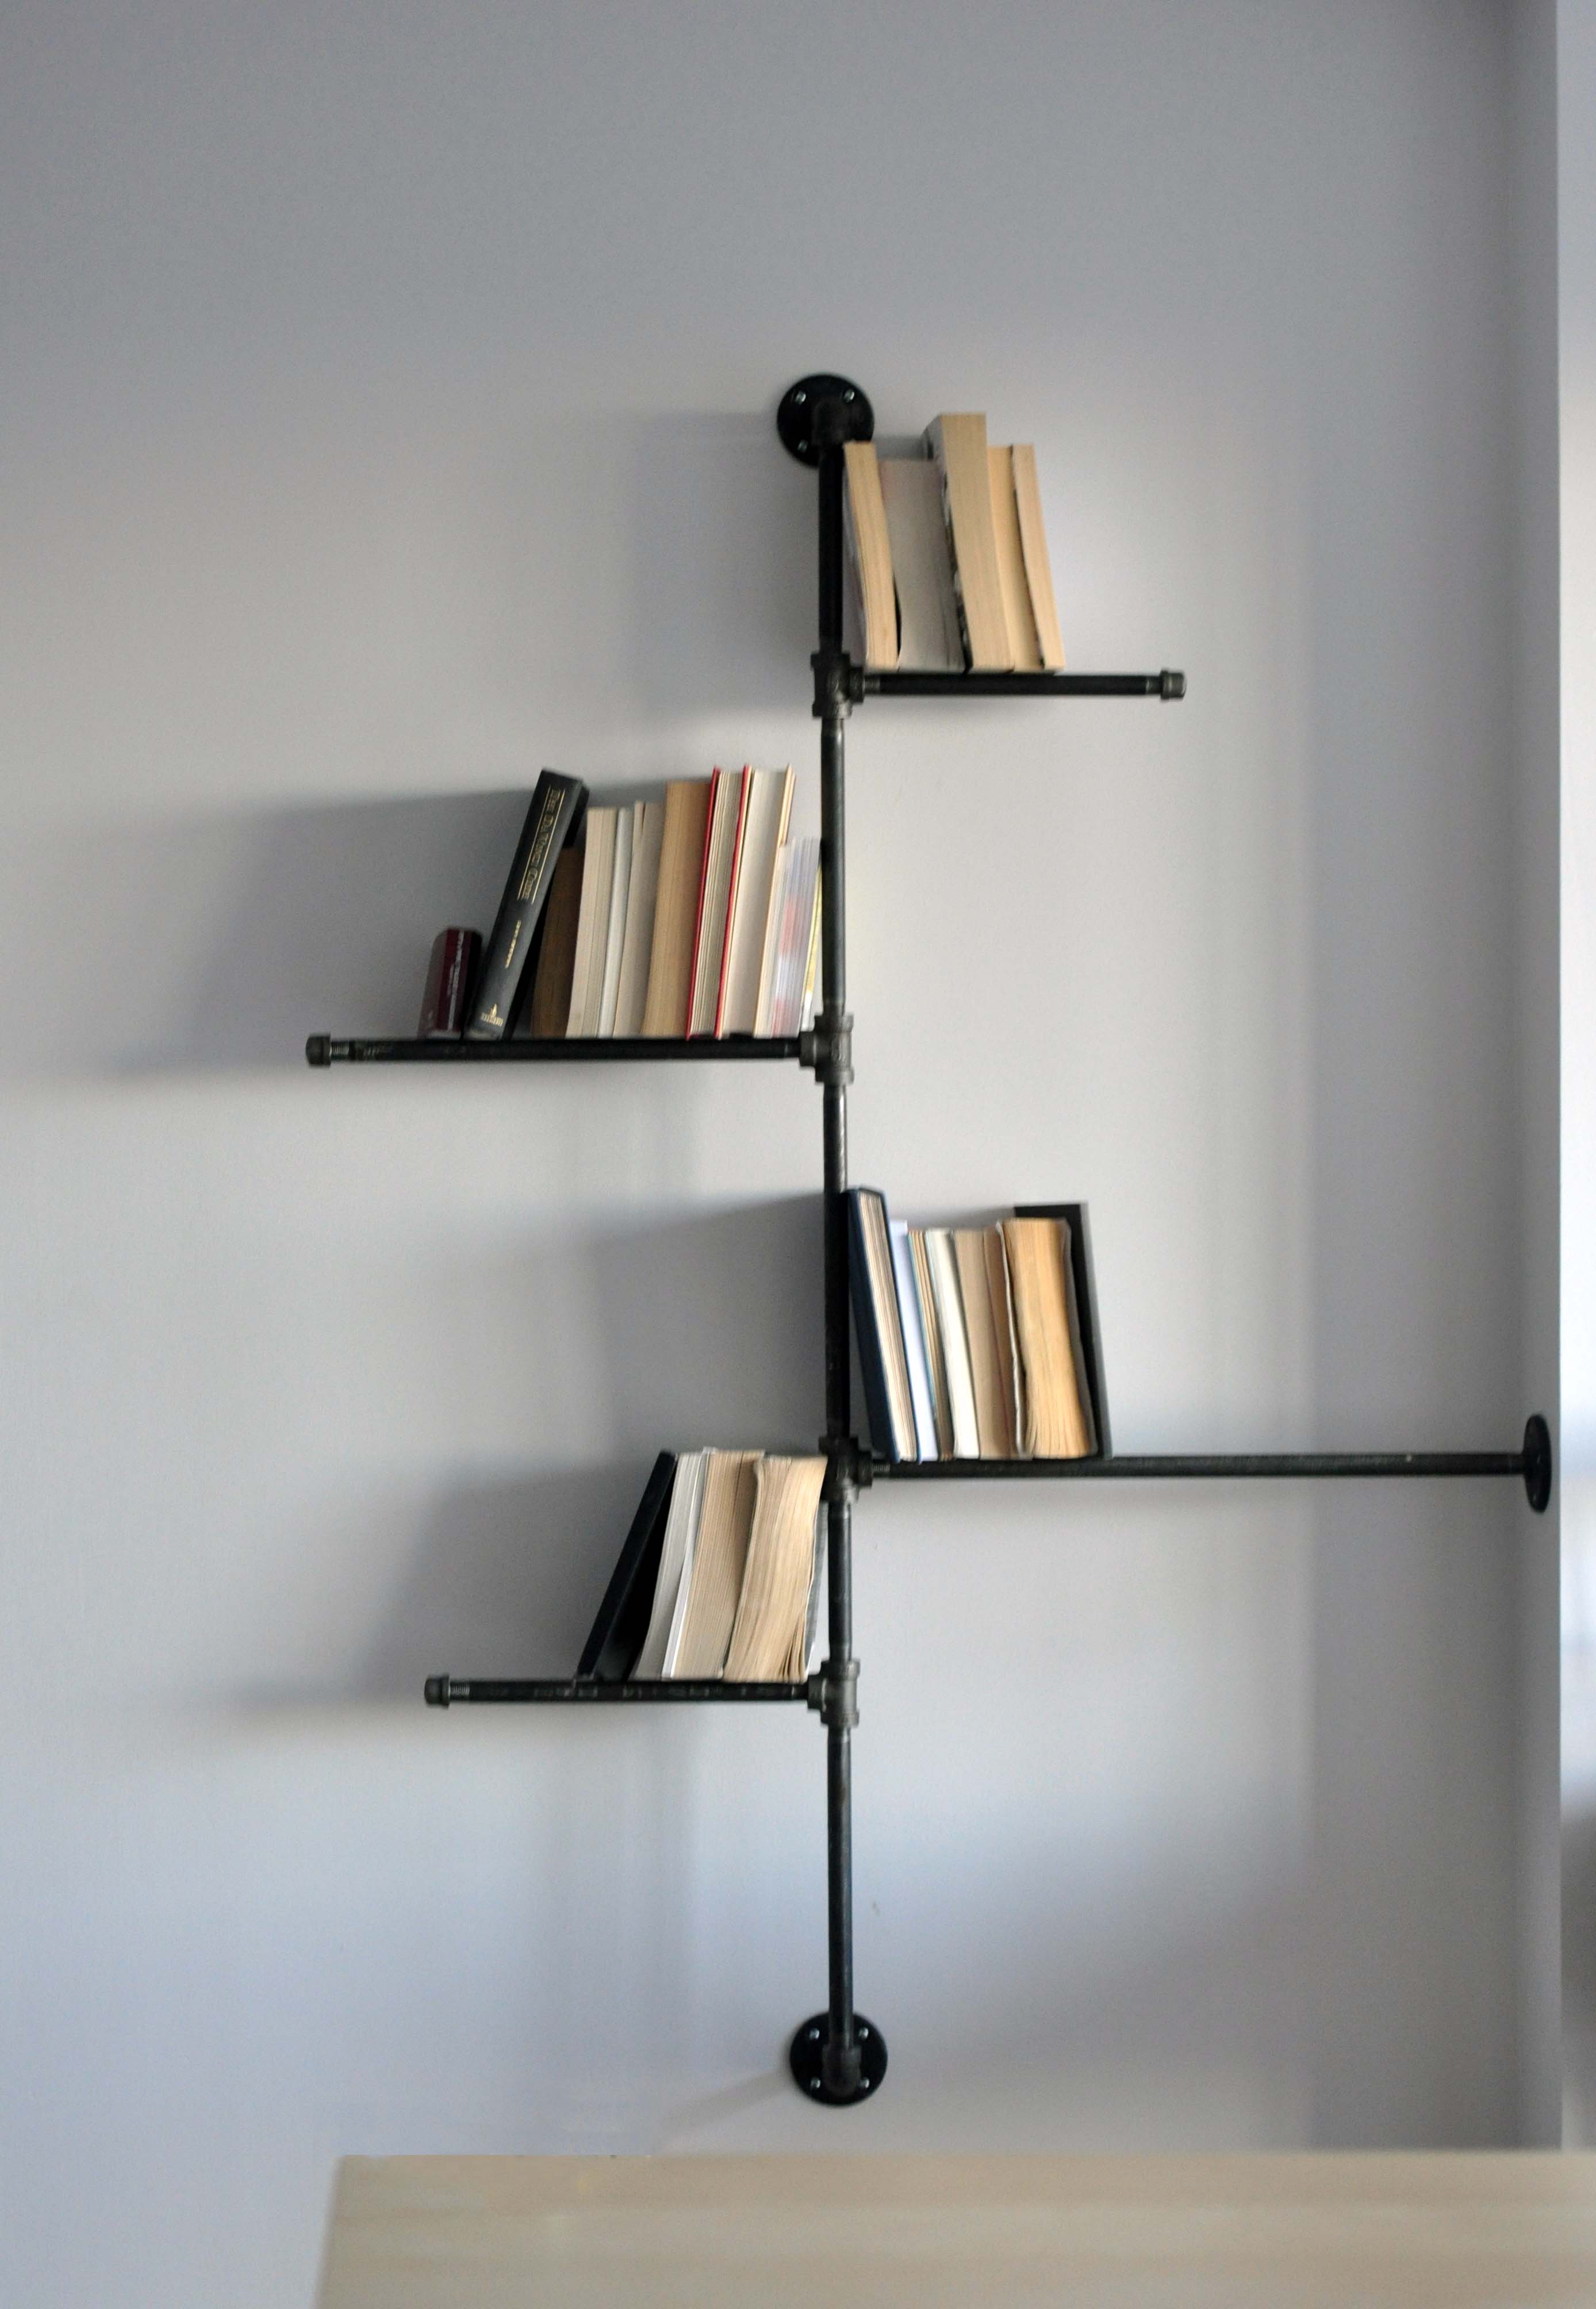 furniture interesting bookshelf target for inspiring interior unique floating with black wrought iron frame modern storage design bookshelves leaning bookcases tall ture wall